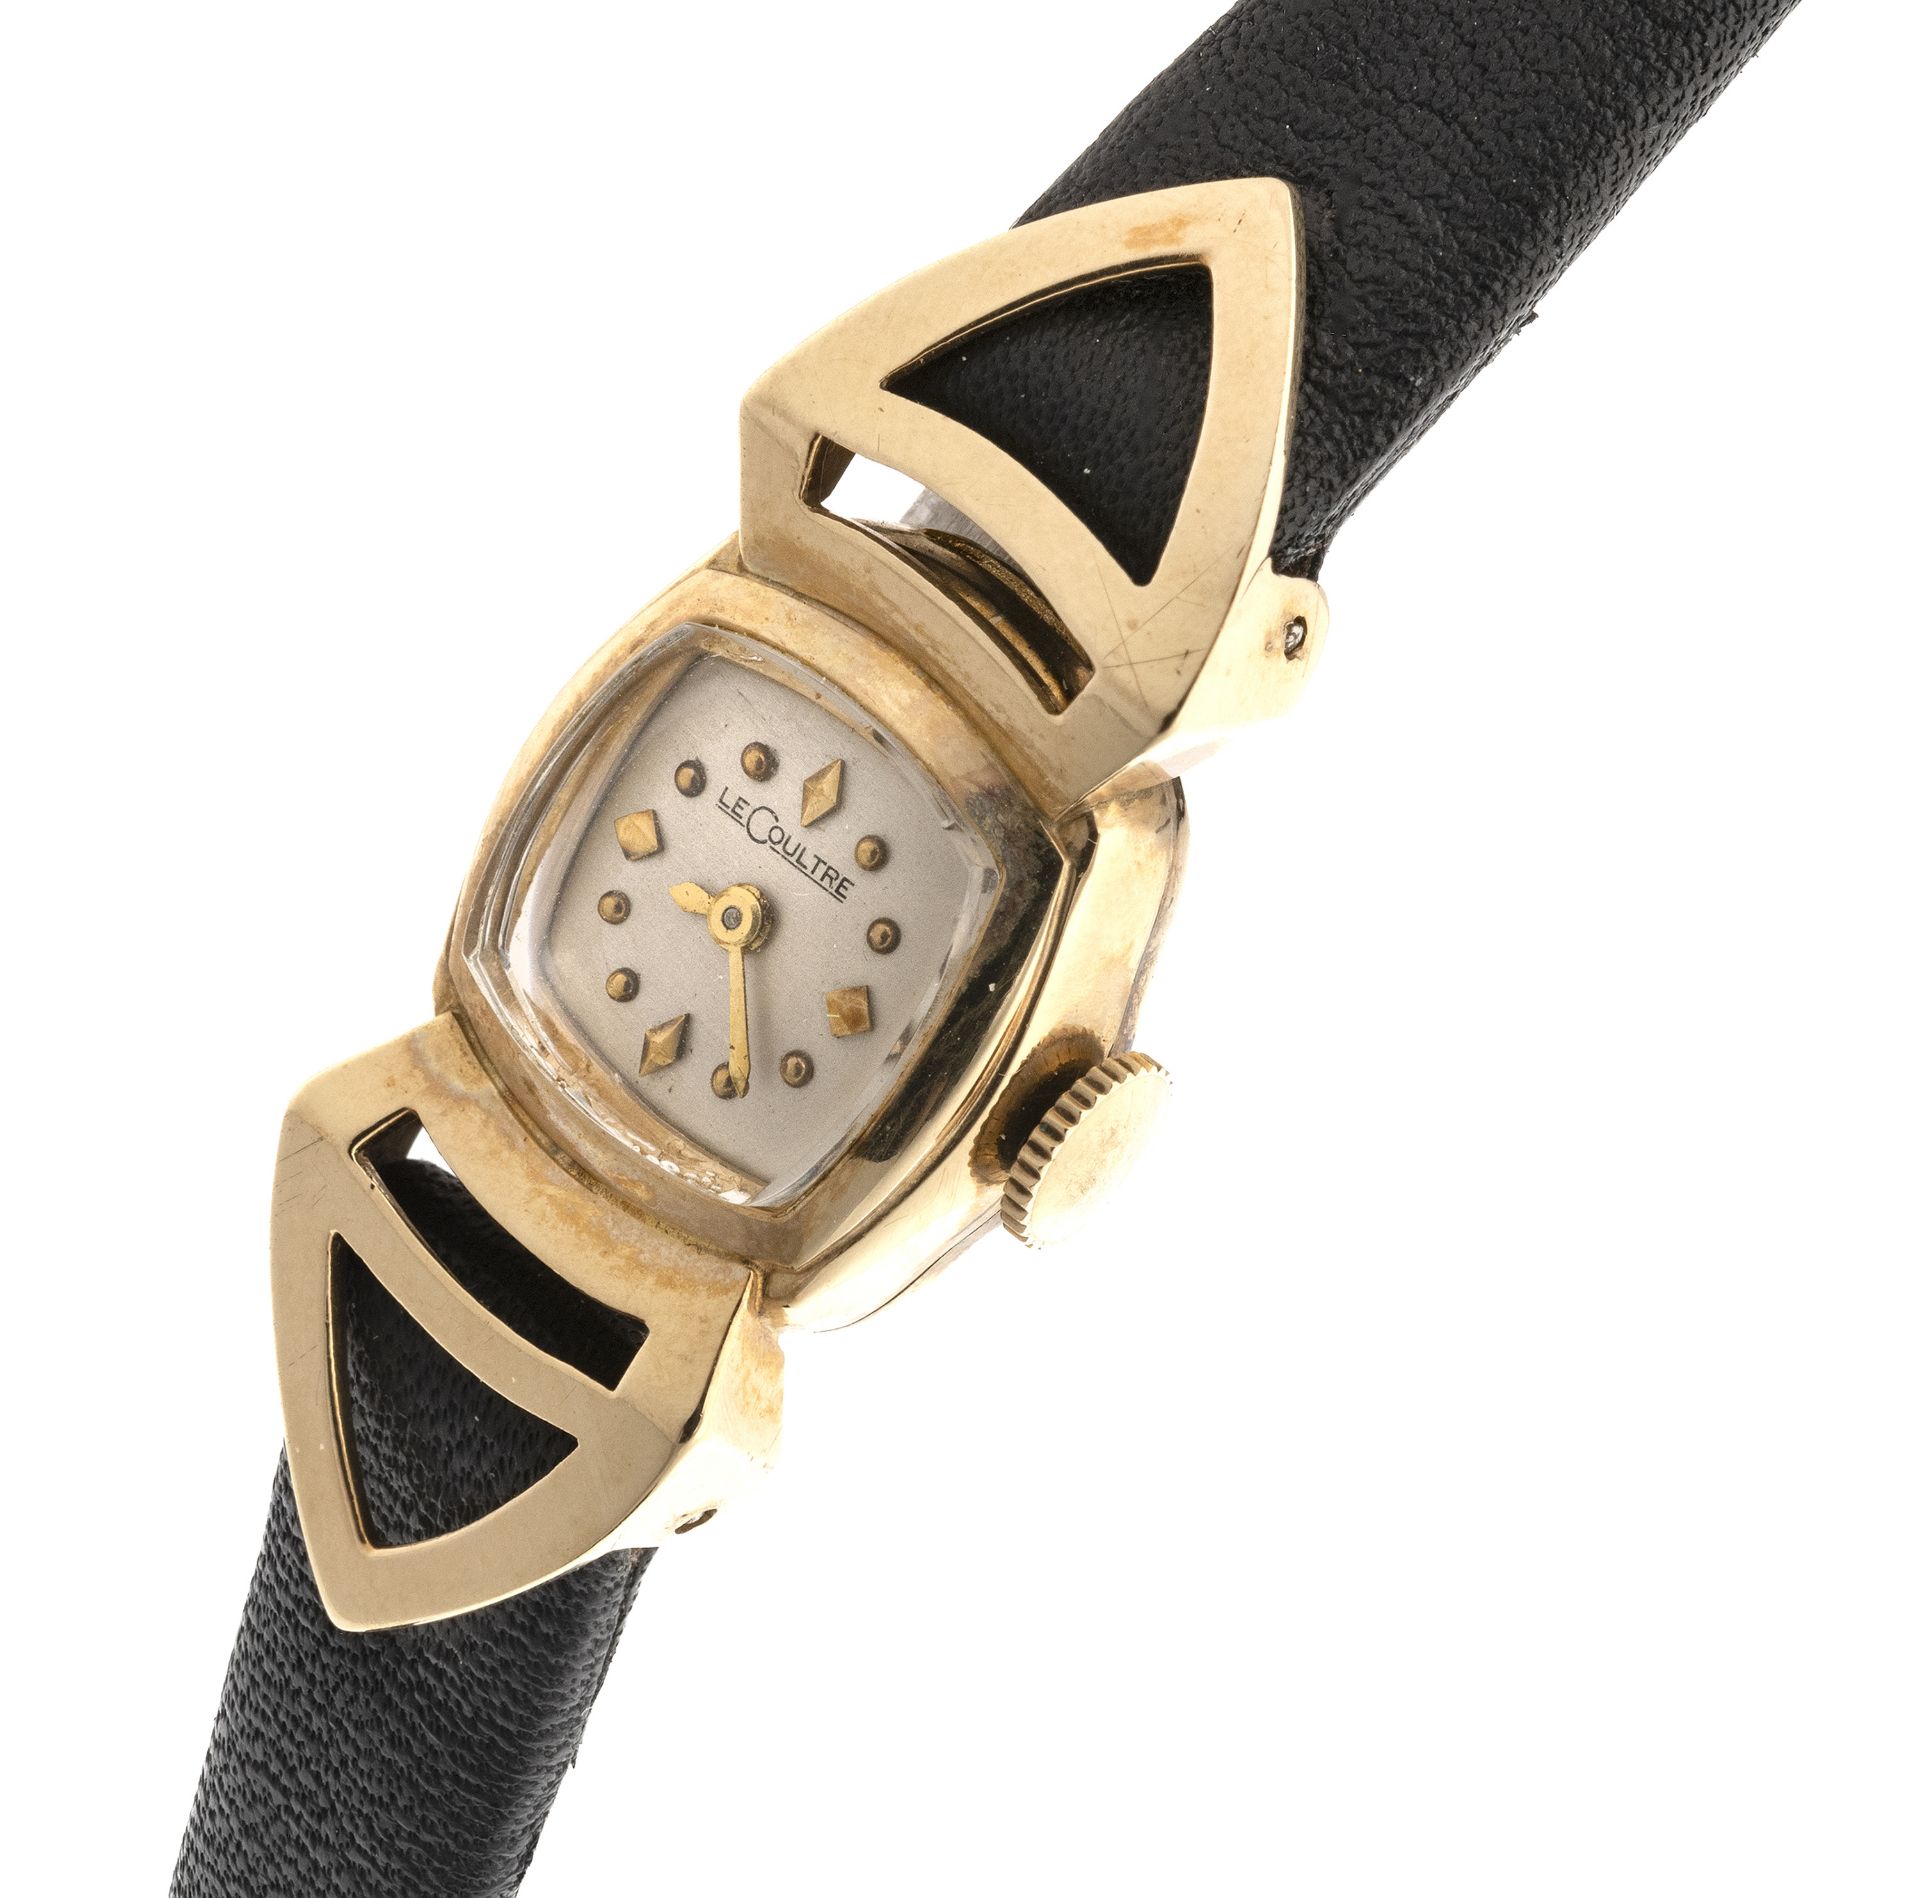 JAEGER LE COULTRE LADY WRISTWATCH - Image 2 of 2